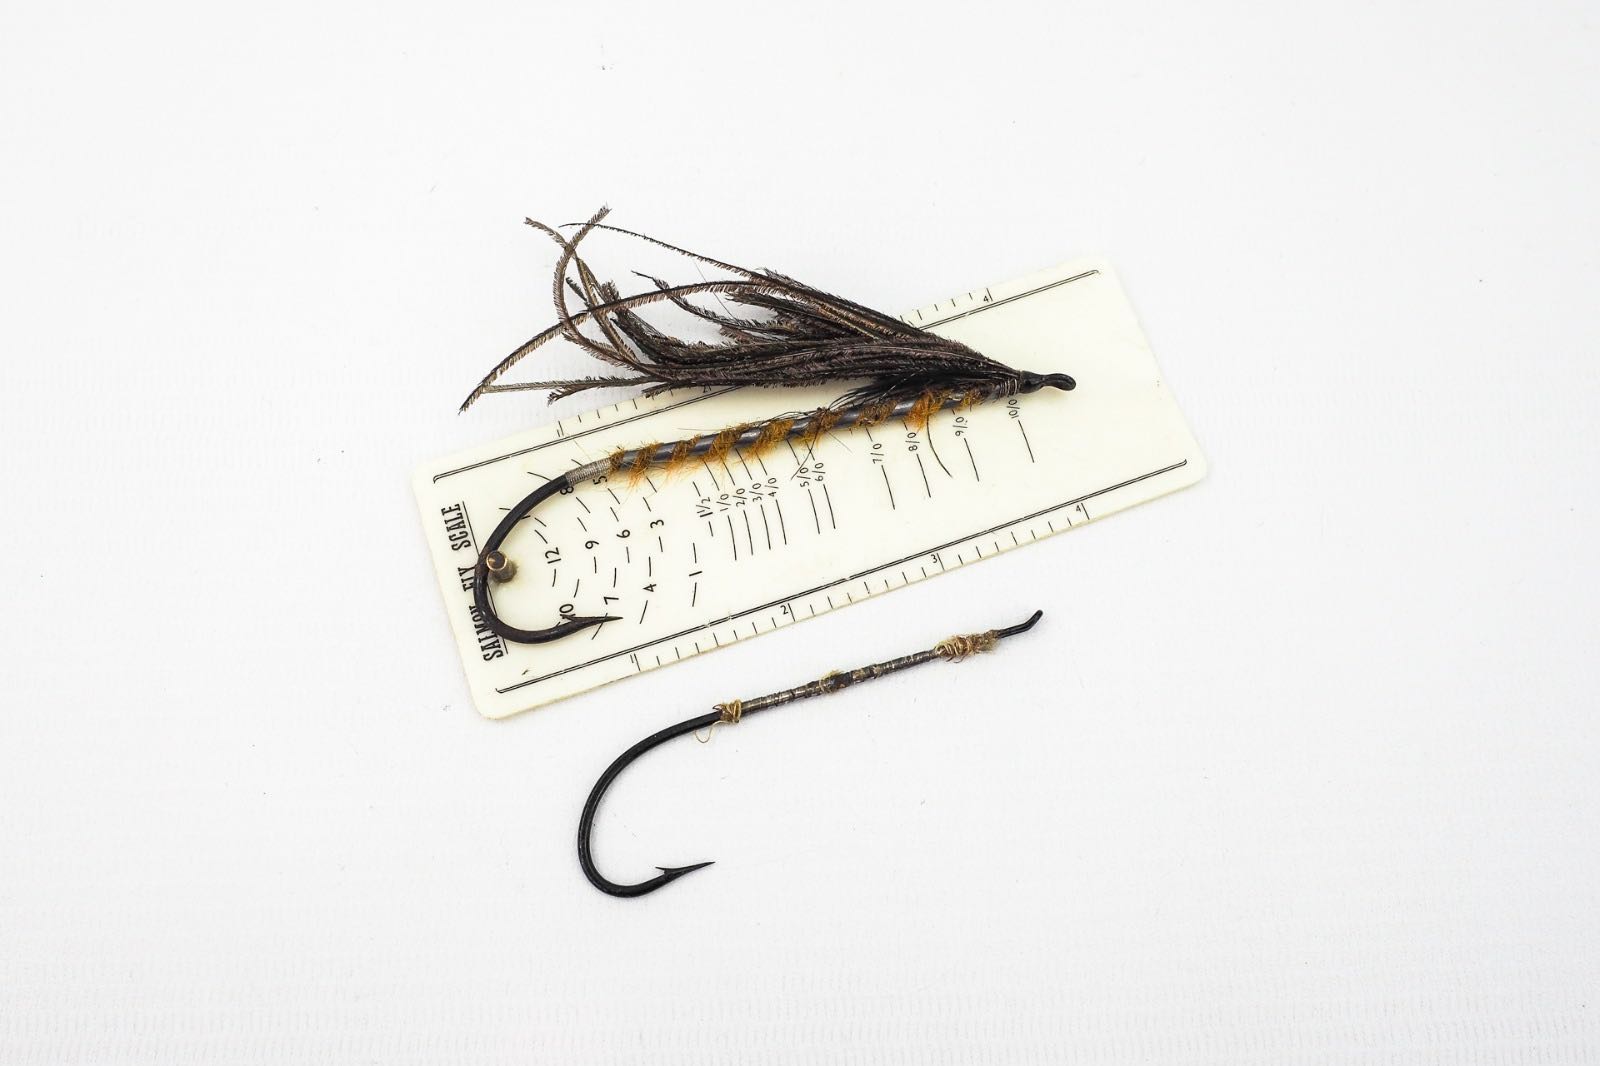 Traditional salmon fly hooks